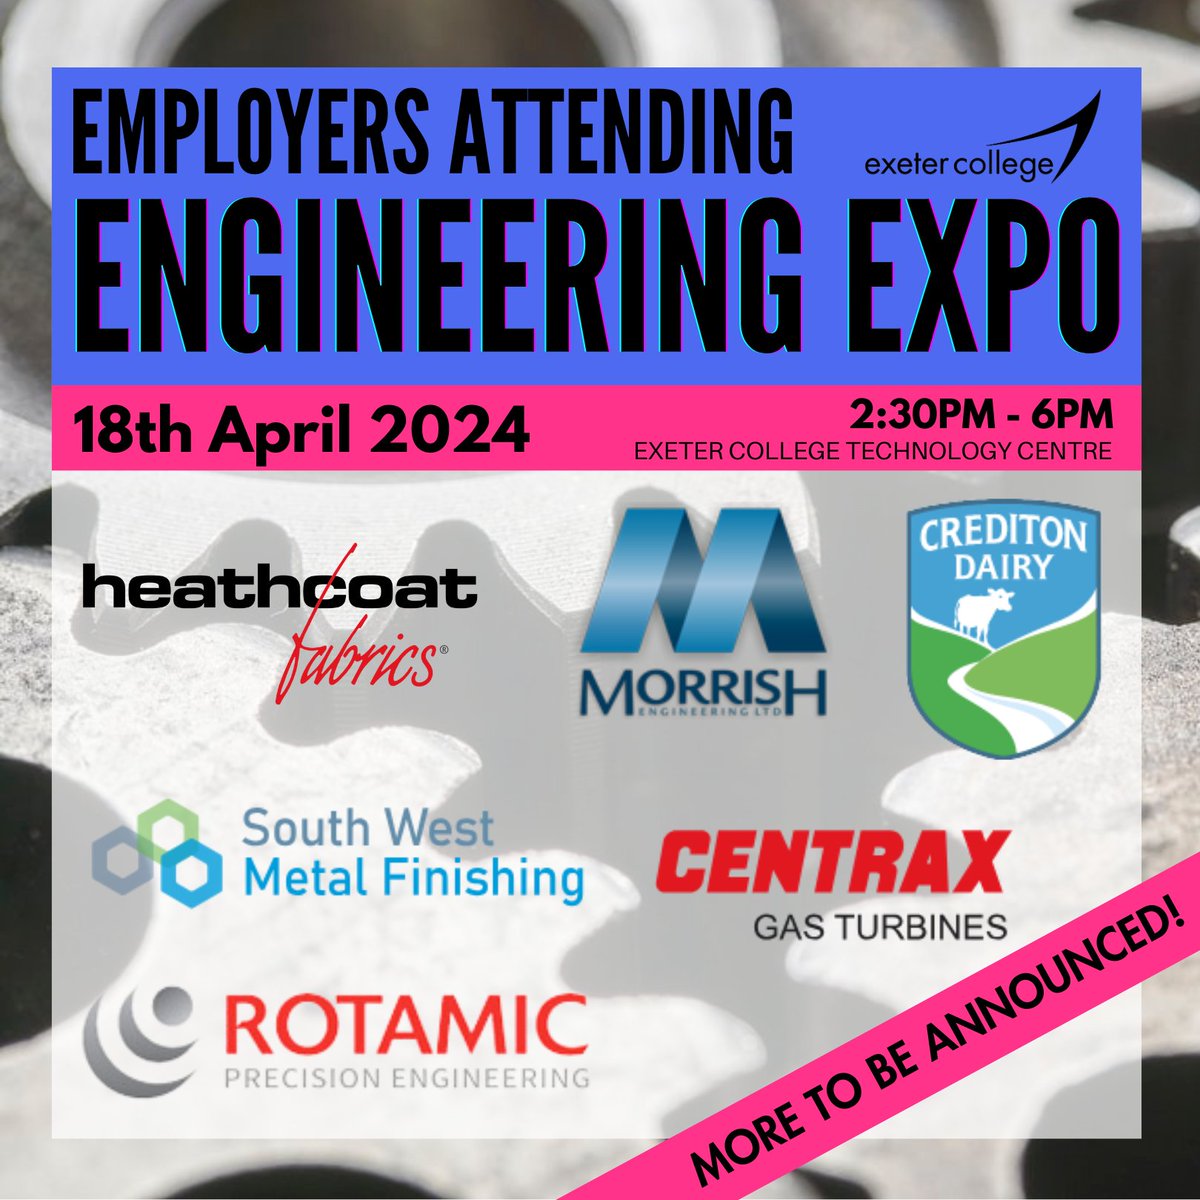 Our Engineering Expo is gearing up with an incredible lineup of #employers! Get ready to meet Heathcoat Fabrics, @MorrishEngineer, Crediton Dairy, @swmf, Centrax Gas Turbines & Rotamic. They'll be showcasing #vacancies and offering insights into the realm of #engineering. 🛠️